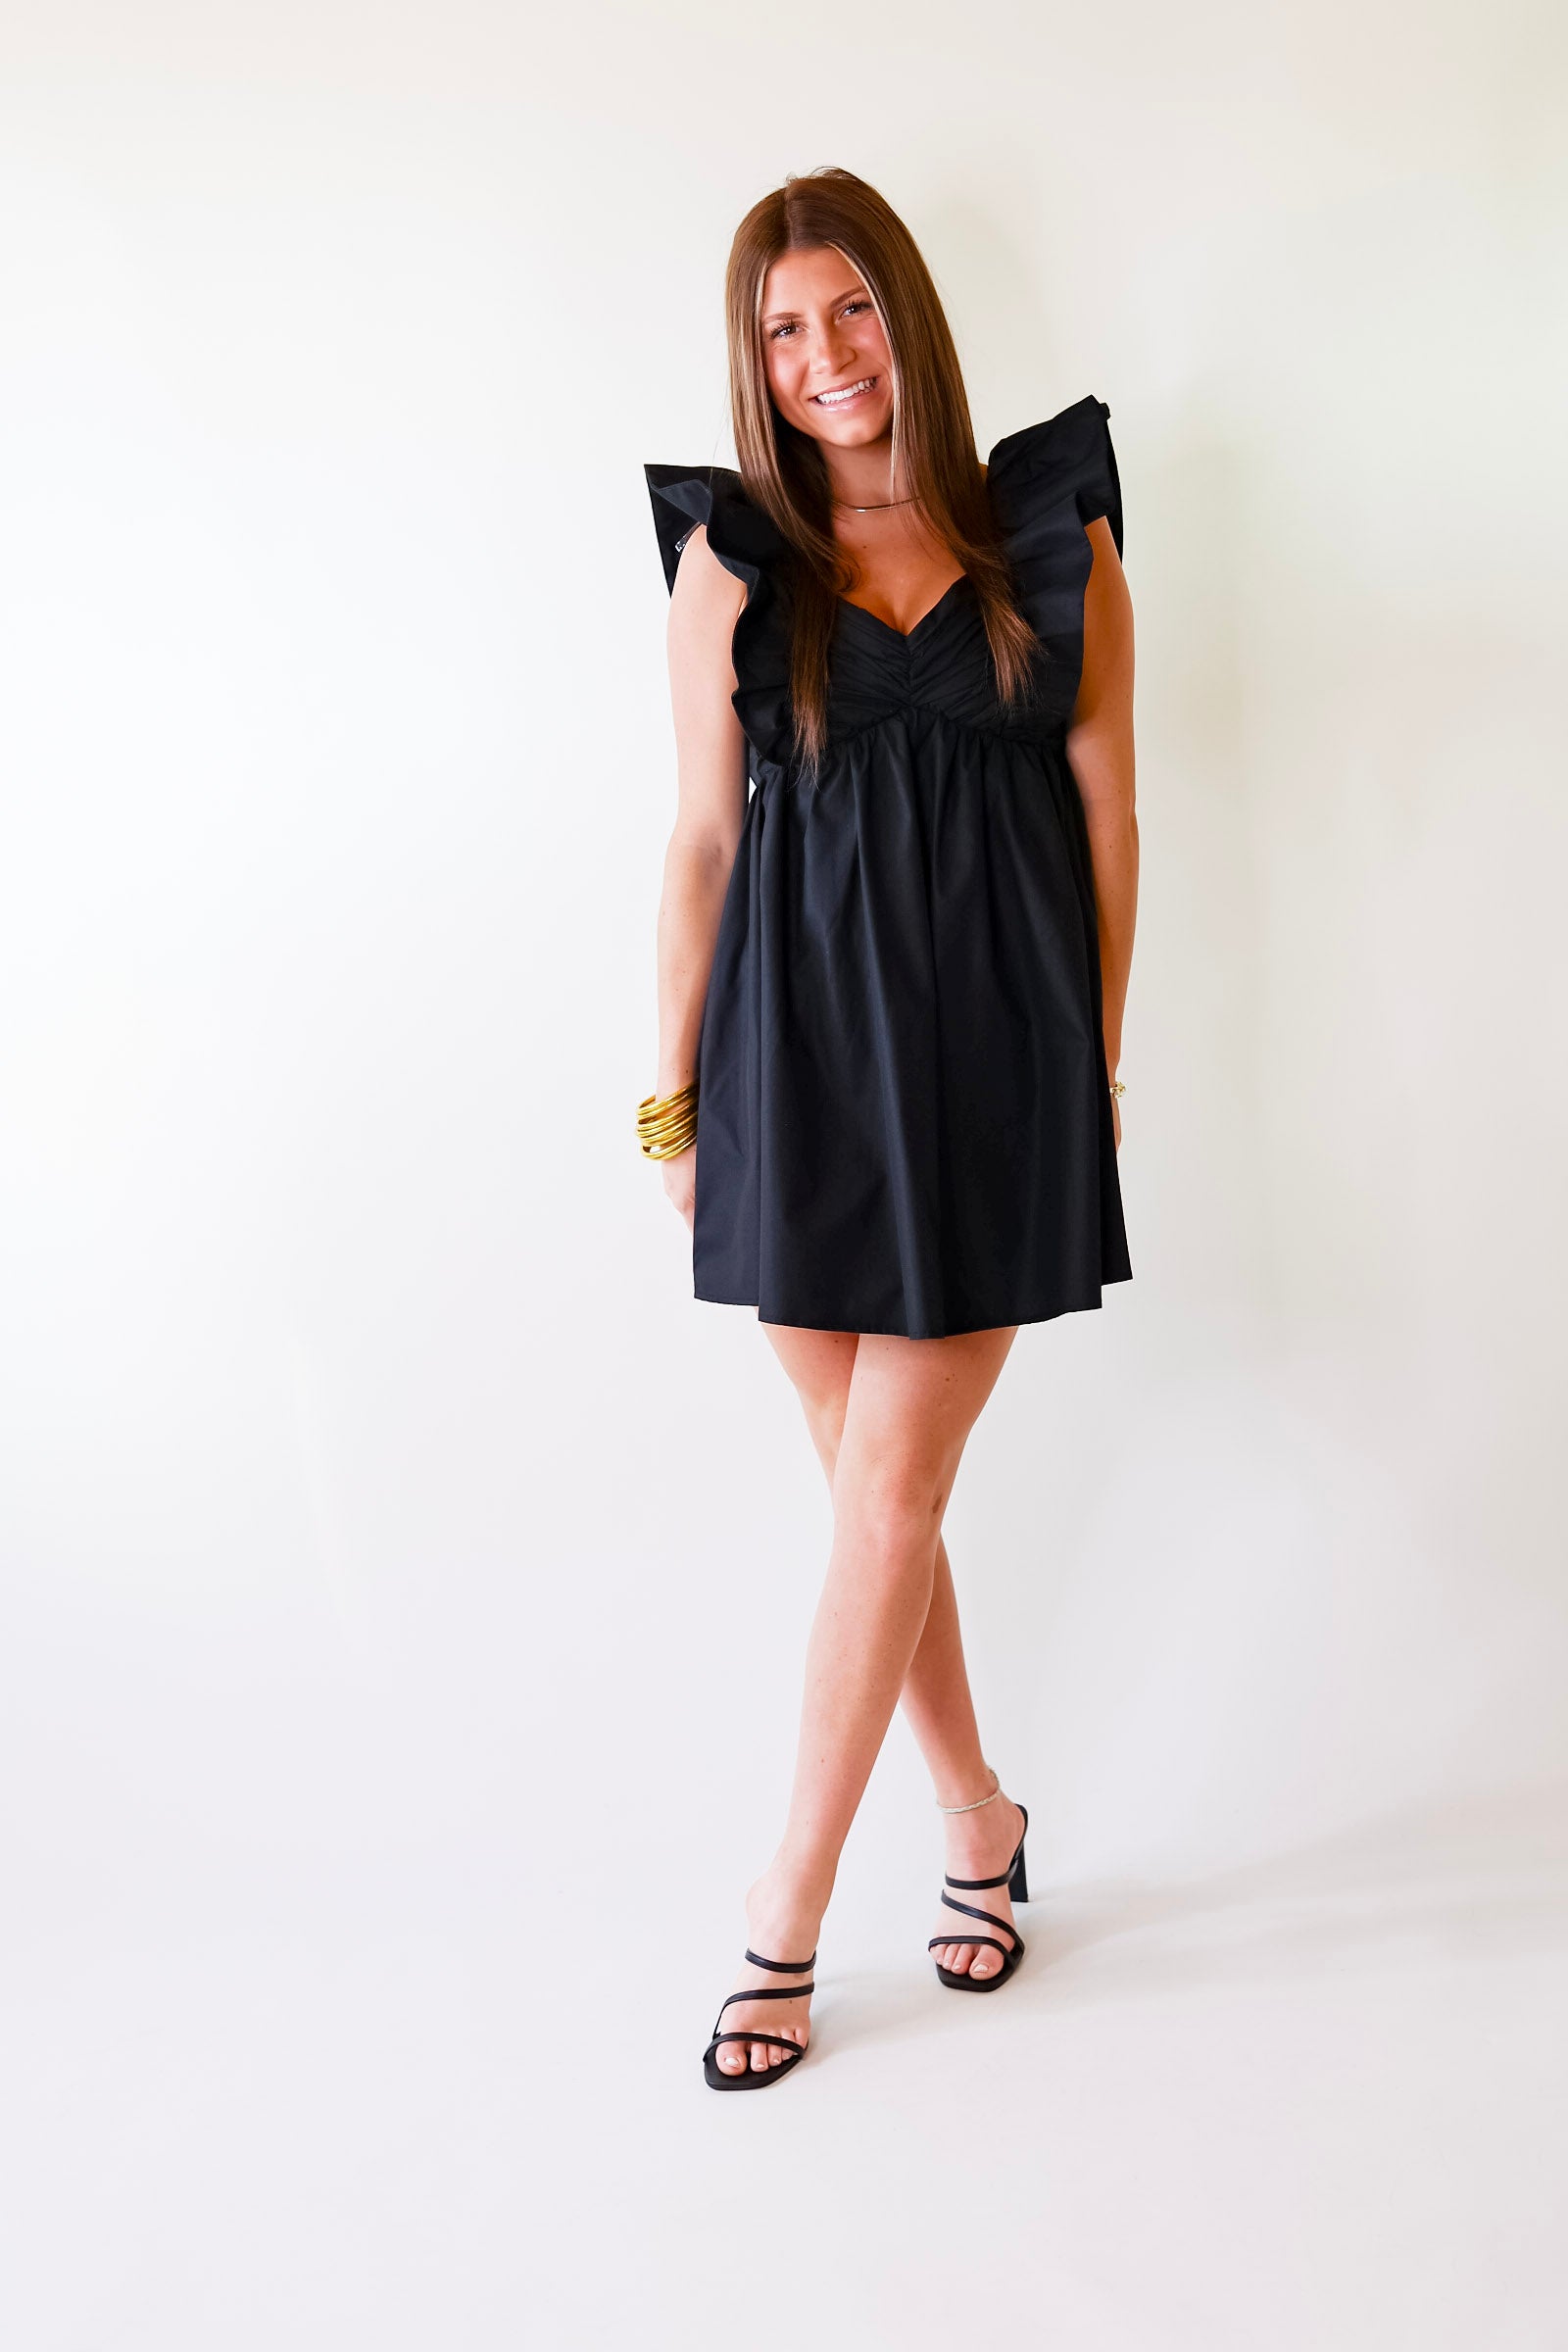 Pixie Perfect Ruffled Sleeve V Neck Dress in Black - Giddy Up Glamour Boutique